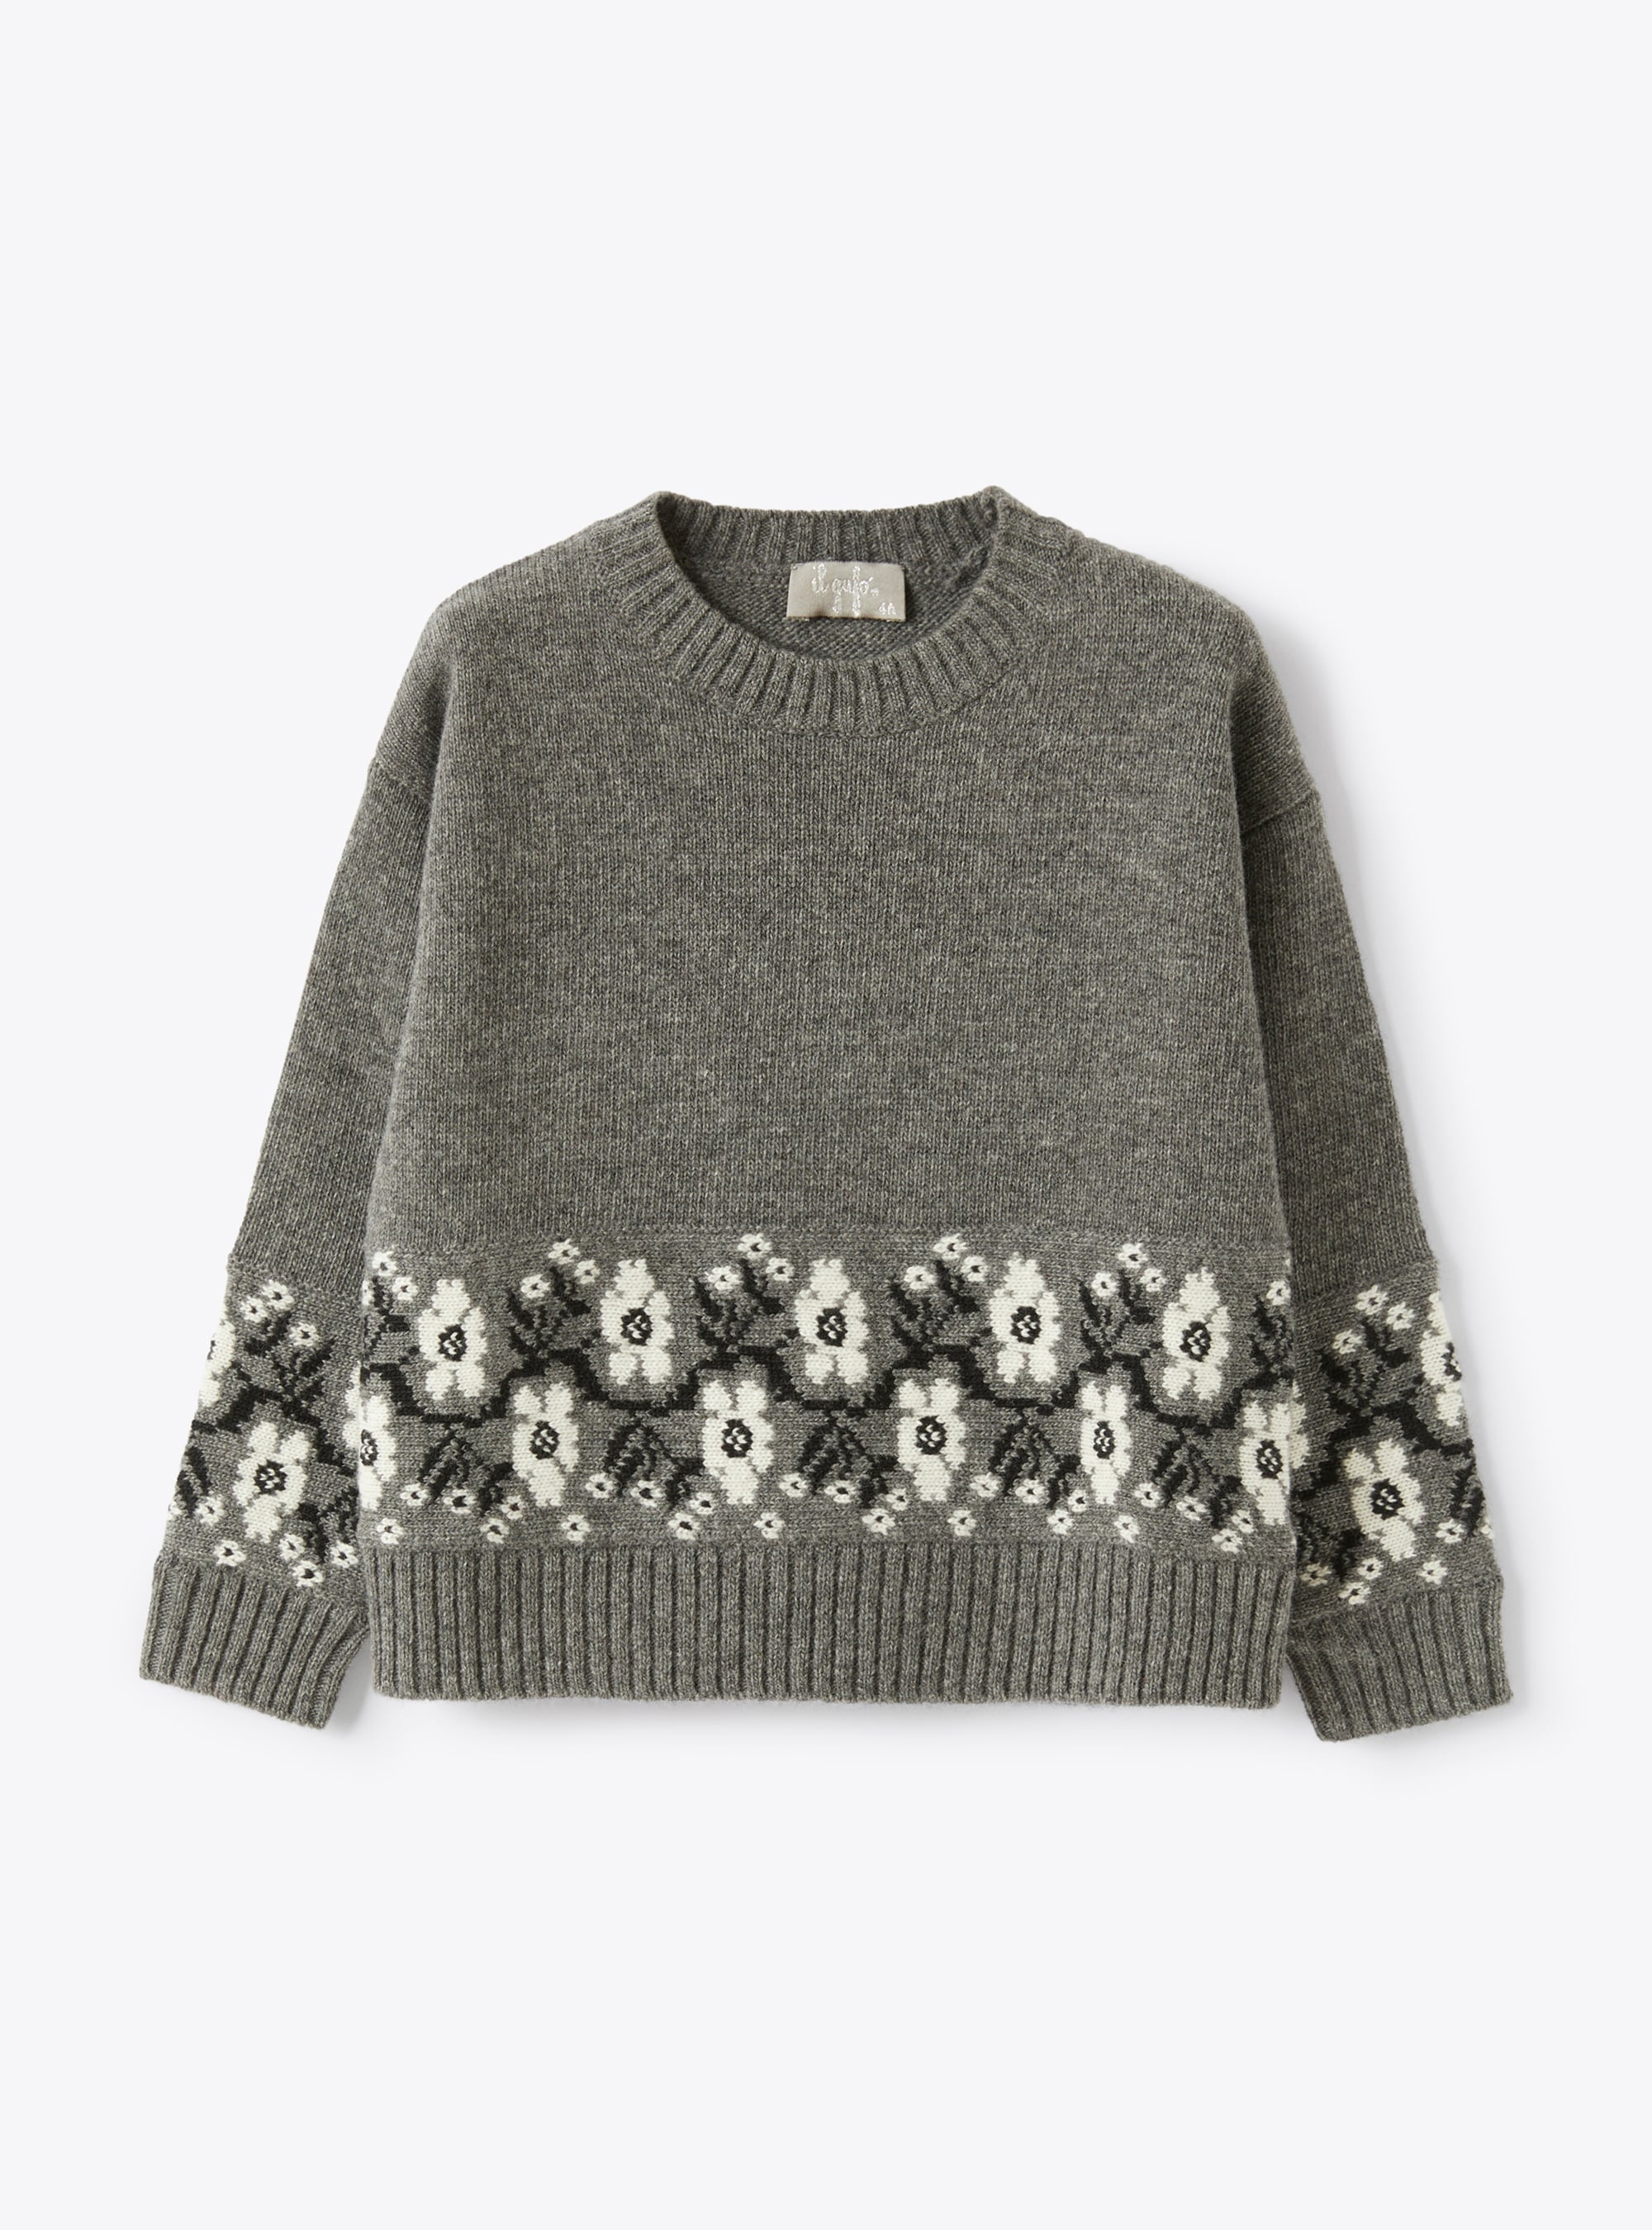 Grey sweater with inlaid floral pattern - Sweaters - Il Gufo